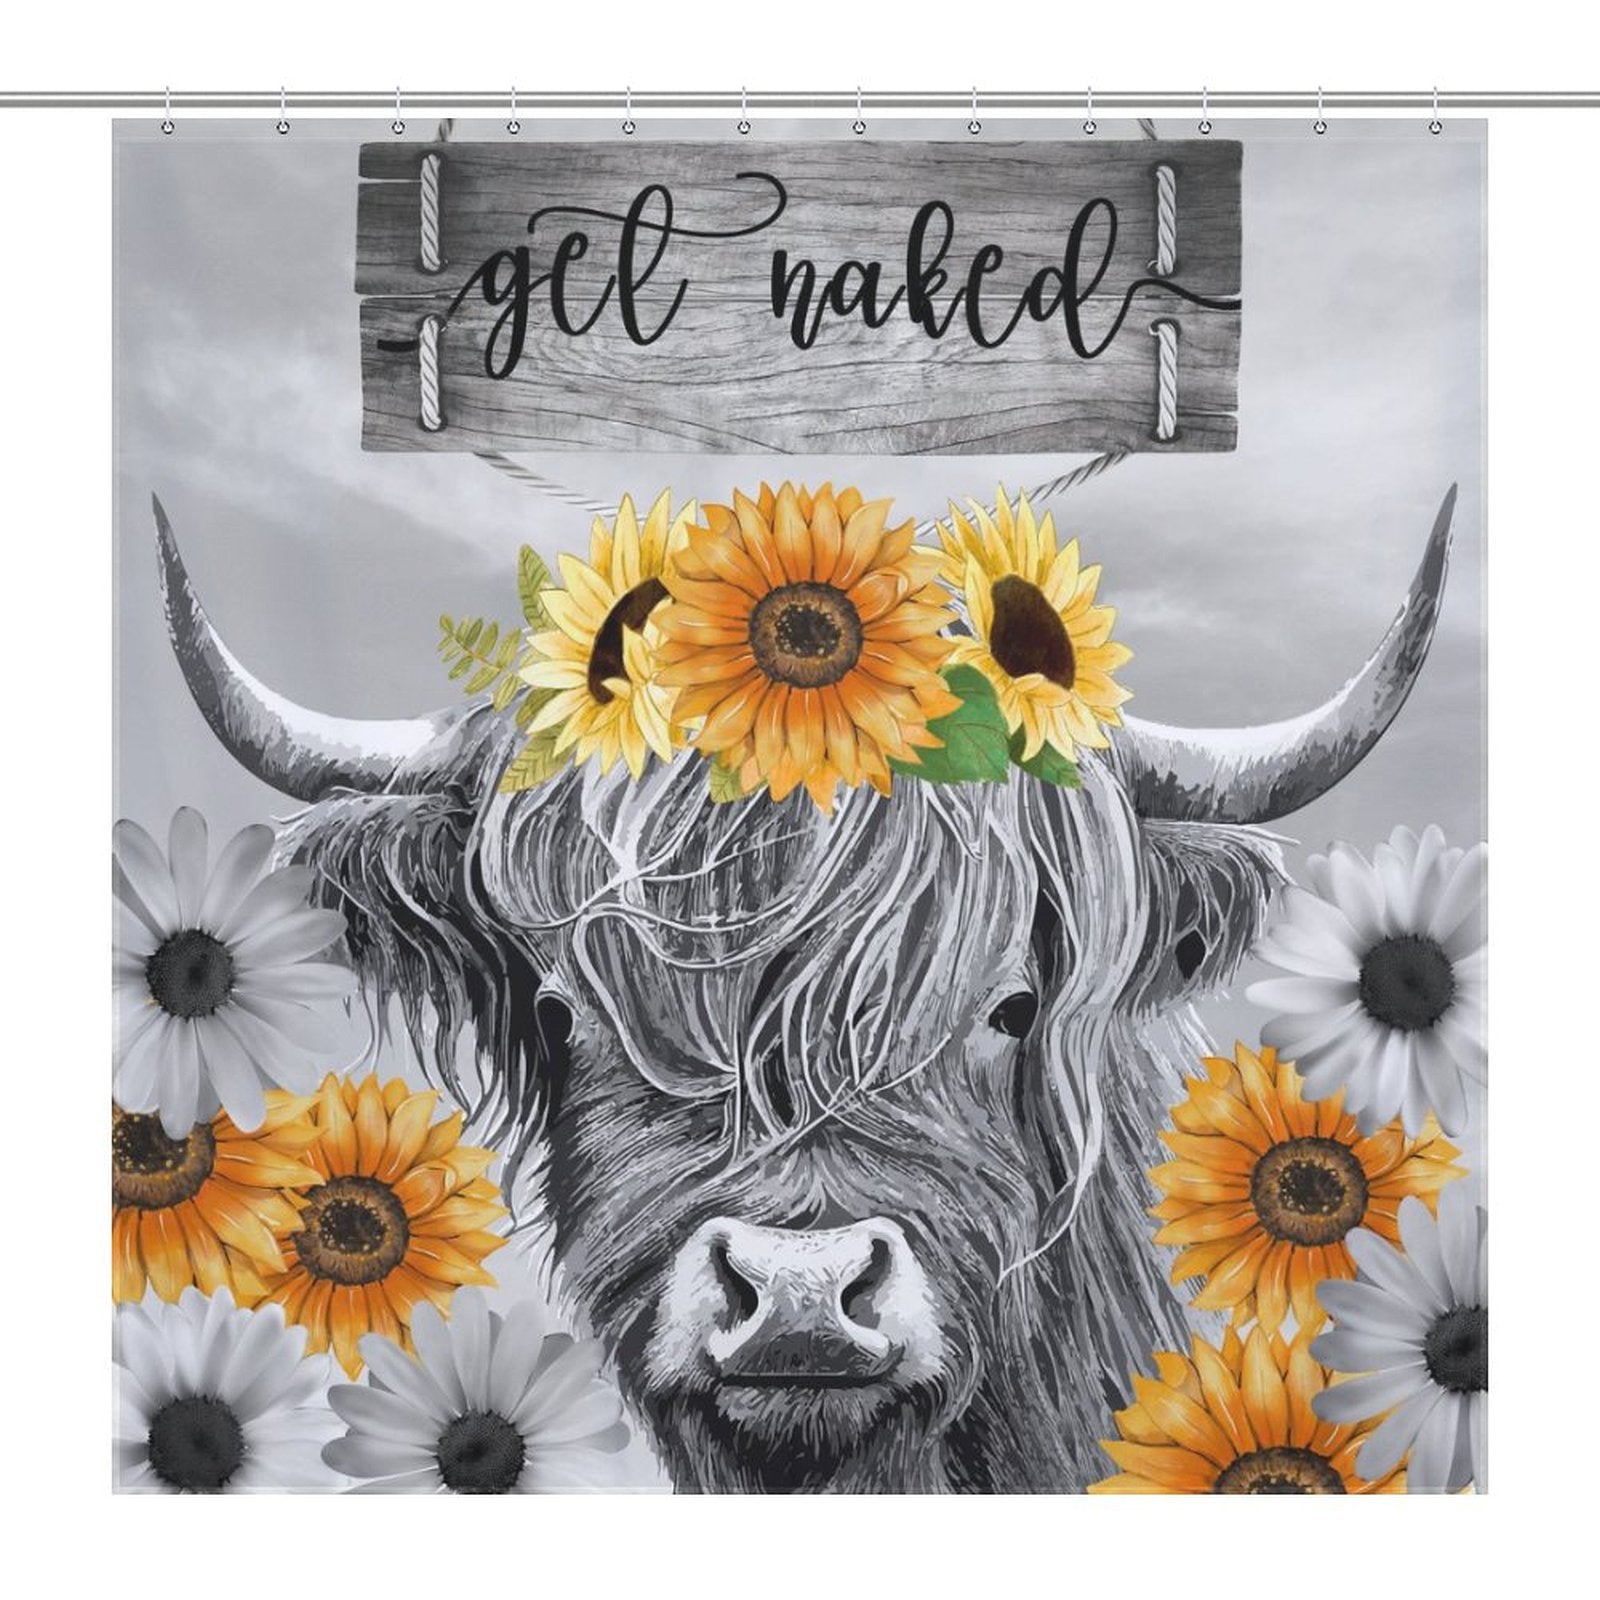 A Highland Cow Black and White Funny Letters Sunflower Get Naked Shower Curtain-Cottoncat featuring a cow with flowers on its head, surrounded by sunflowers and daisies. The text "Get Naked" is displayed at the top for a playful touch.